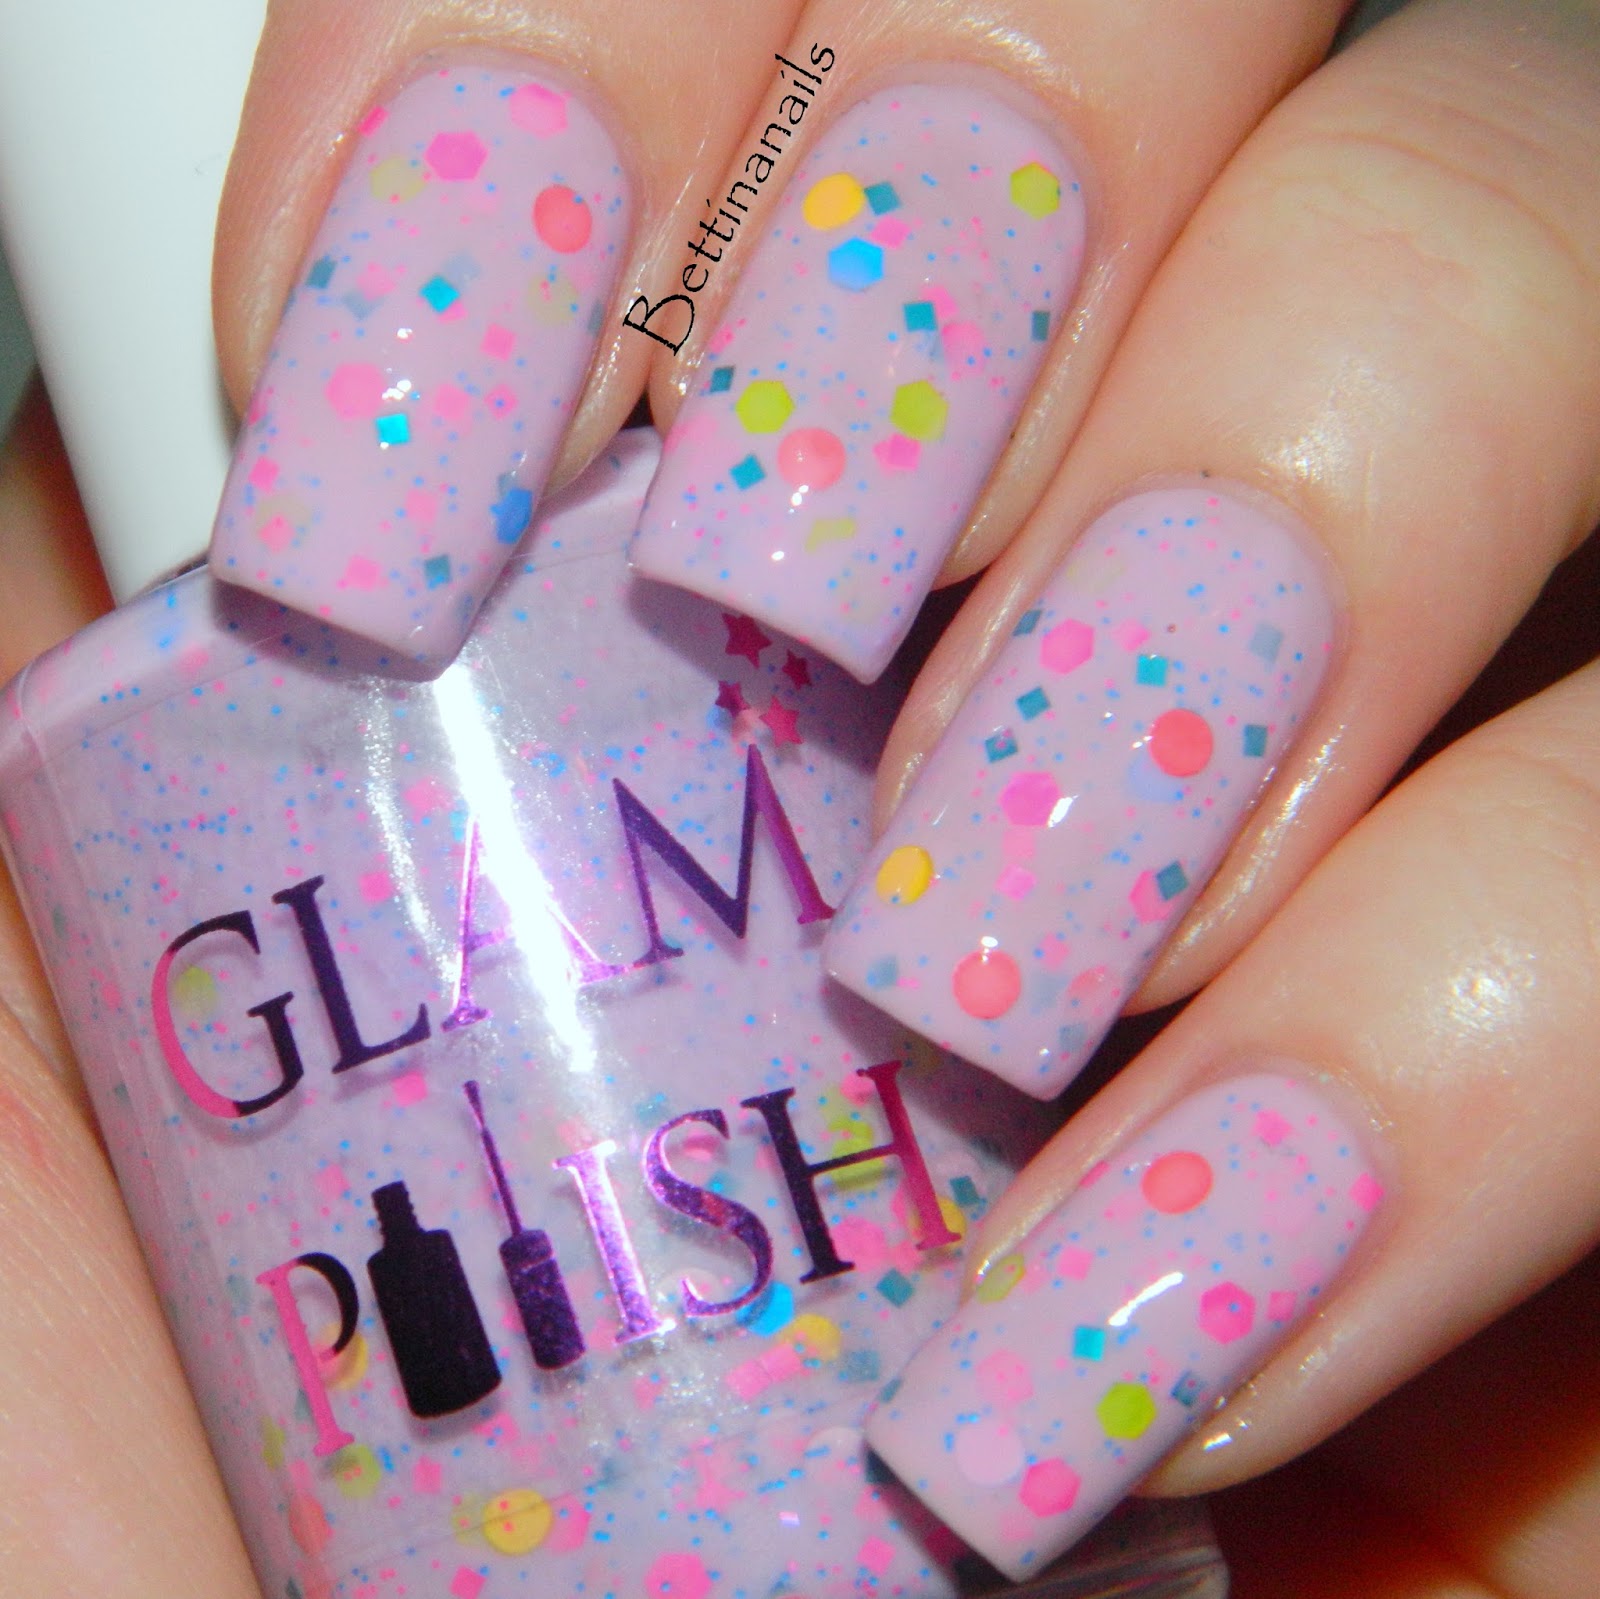 Bettina Nails: My picks from the Glam Polish Intergalactic Collection!